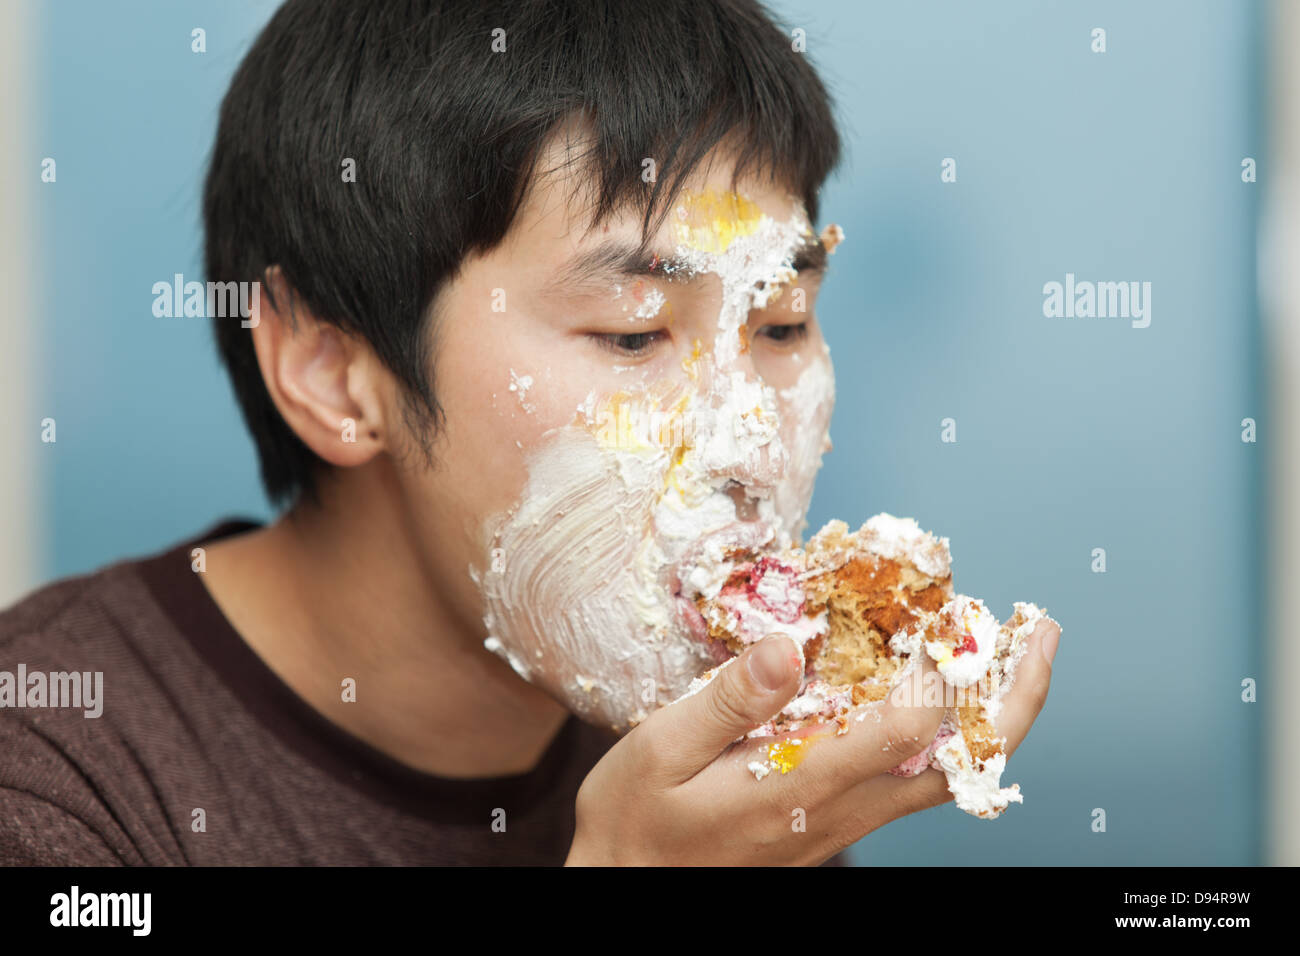 Men eating a piece of cake smeared with cream Stock Photo